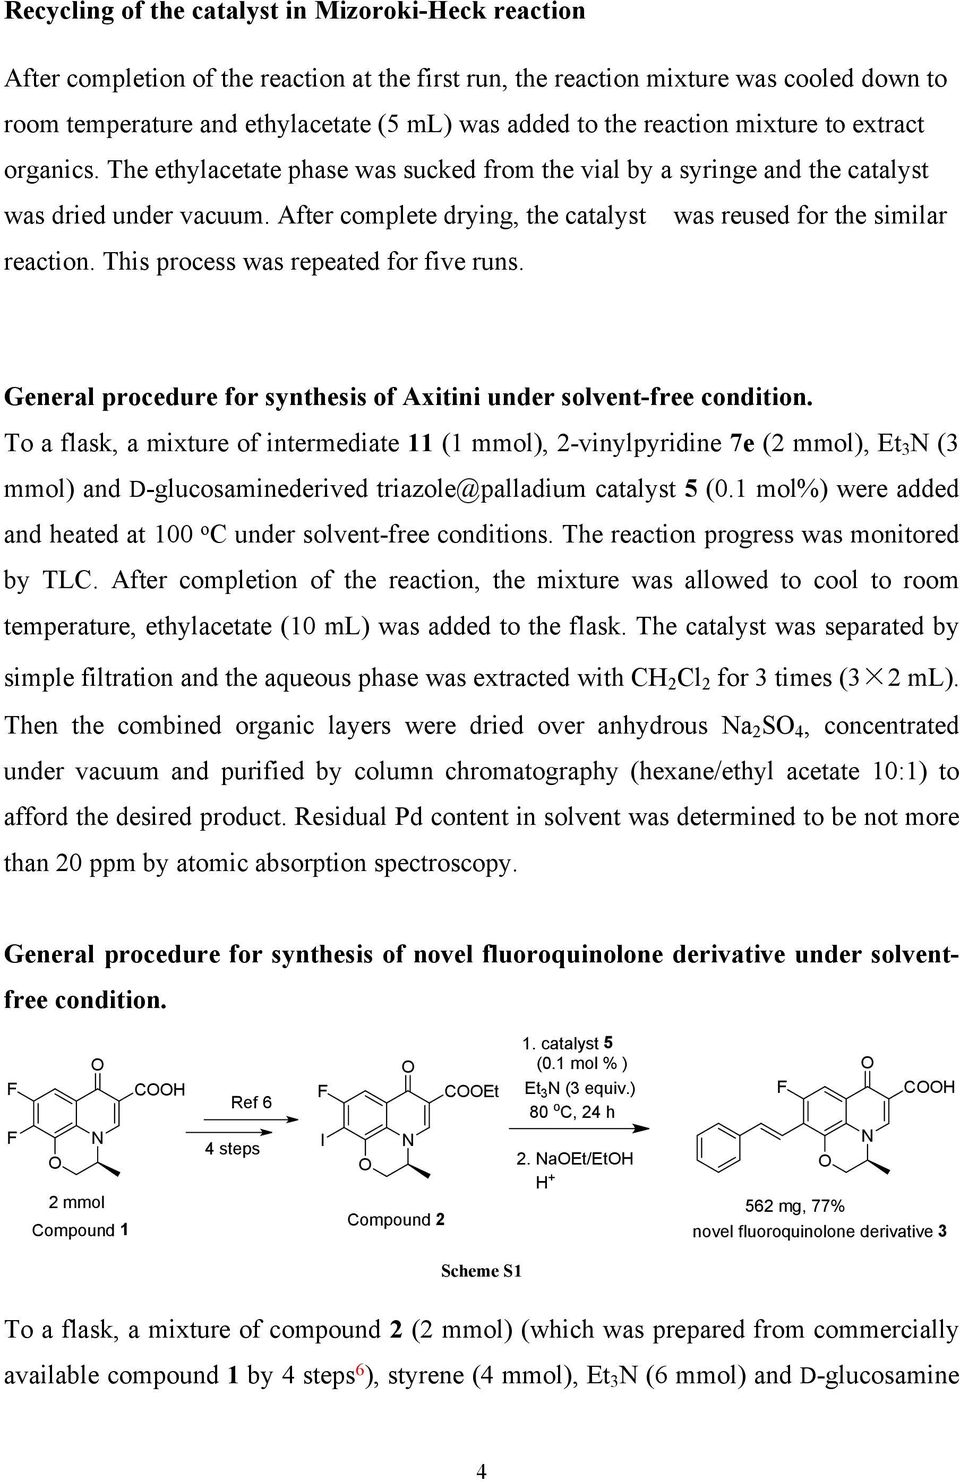 After complete drying, the catalyst was reused for the similar reaction. This process was repeated for five runs. General procedure for synthesis of Axitini under solvent-free condition.